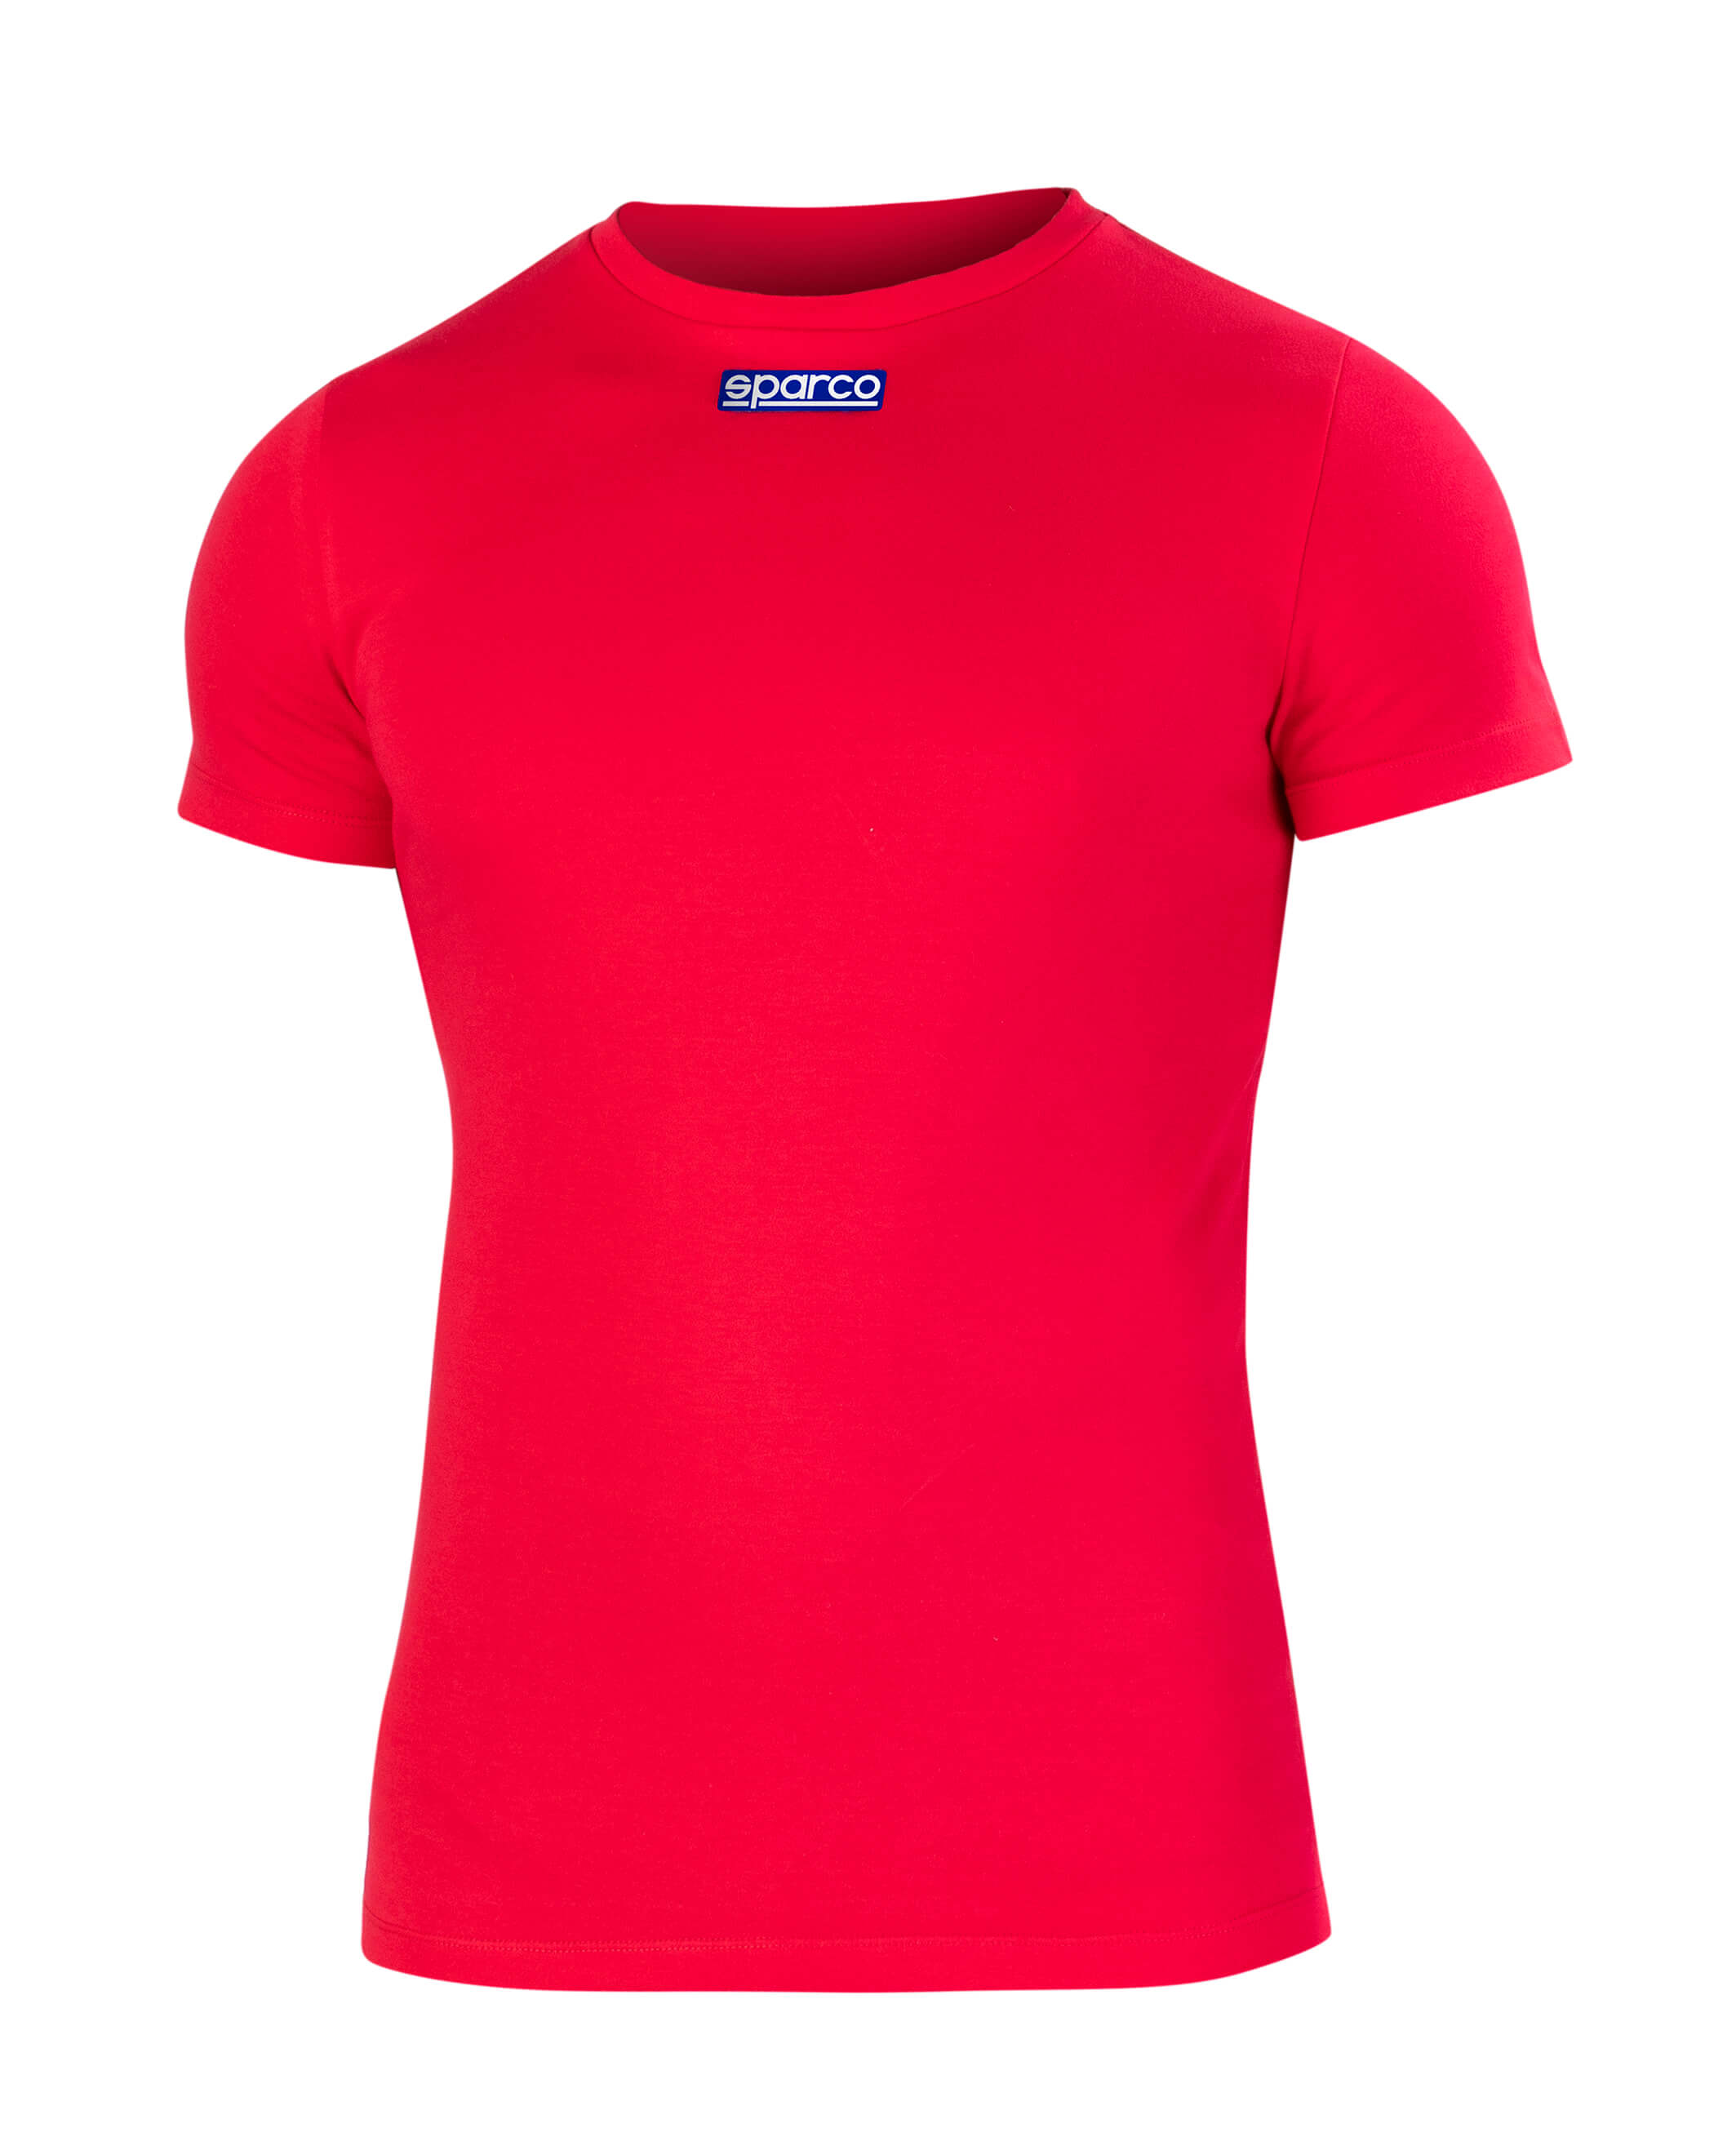 SPARCO 002204RS3L B-ROOKIE Karting T shirt, cotton, red, size L Photo-0 